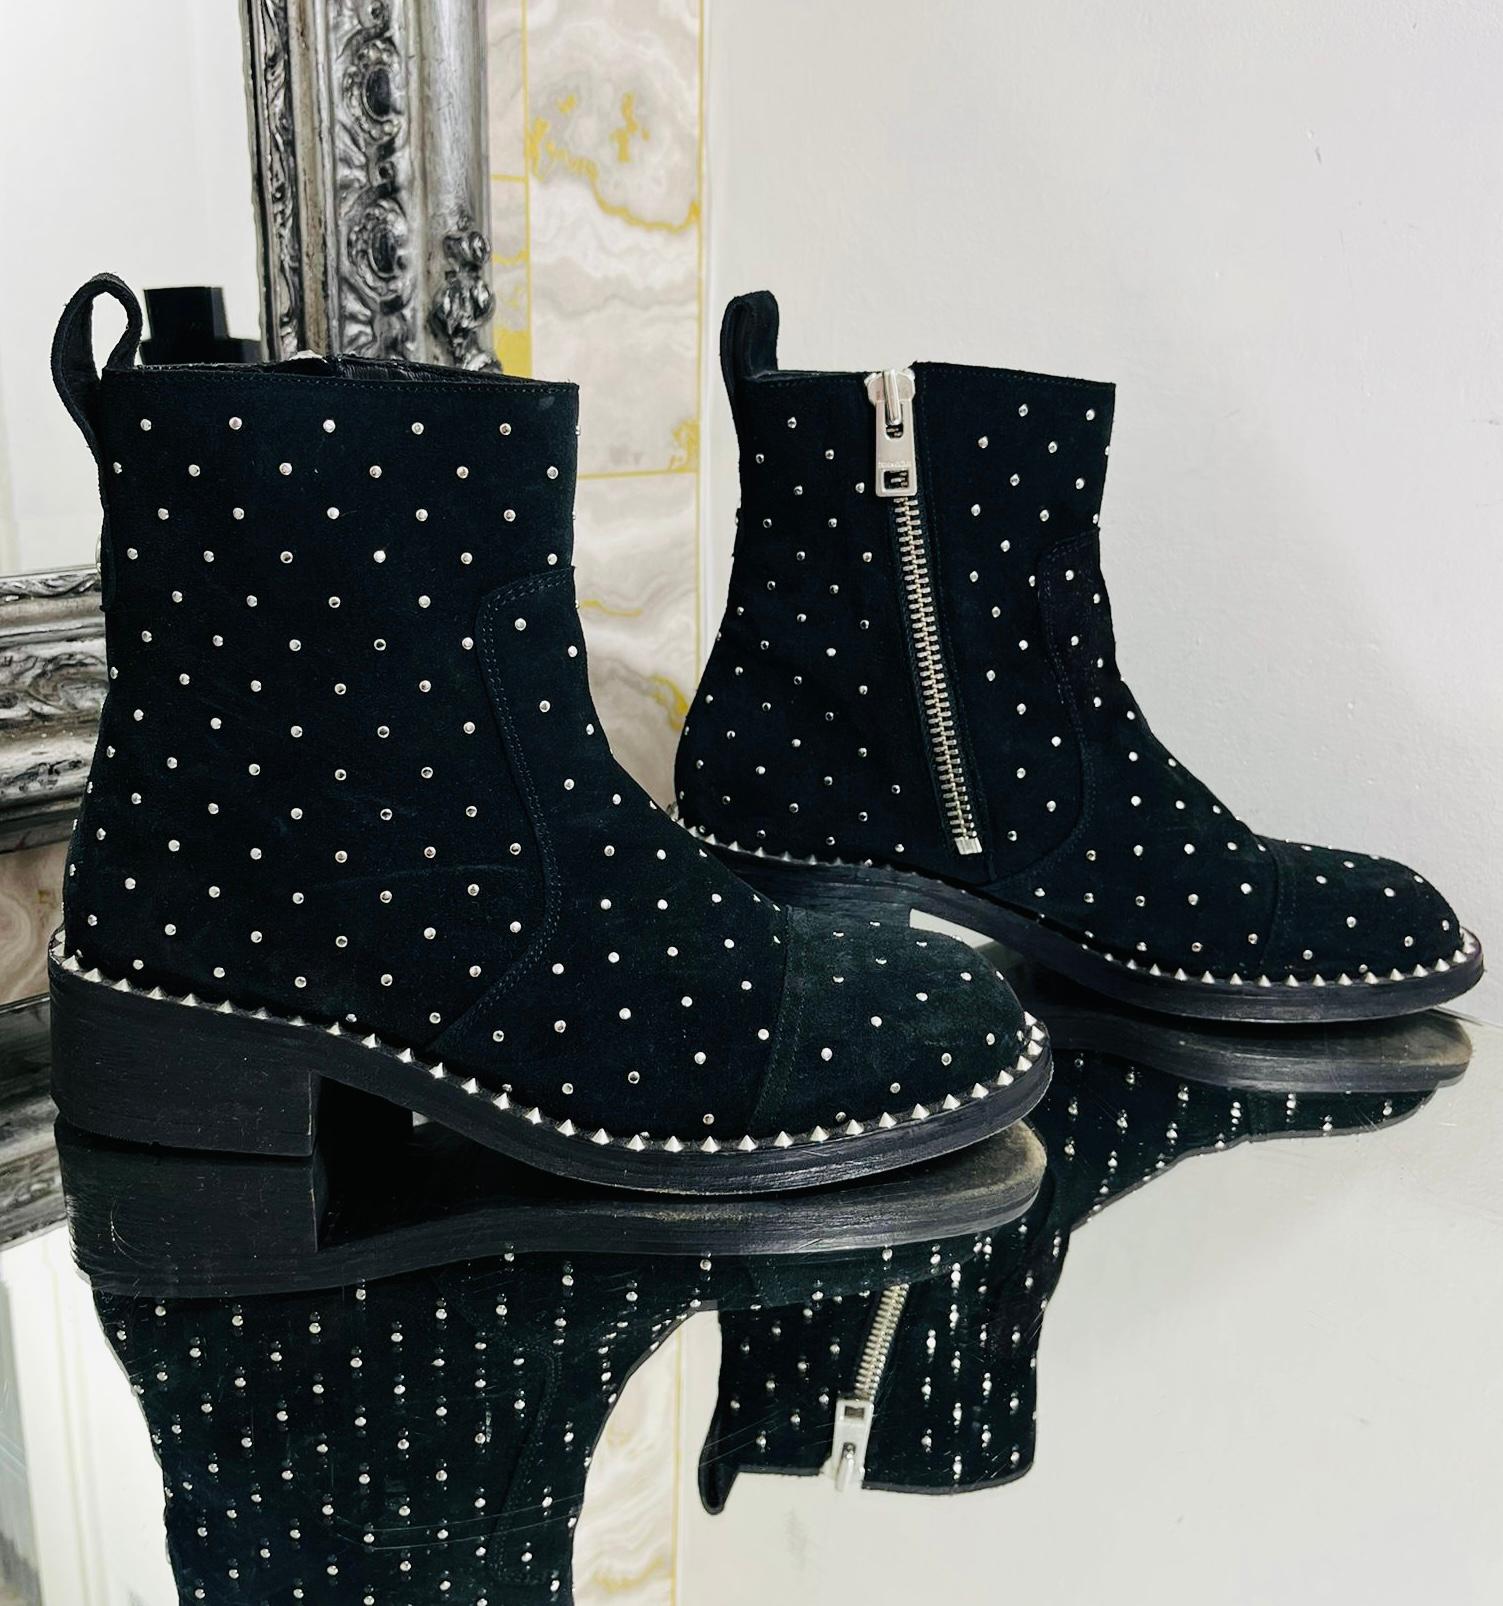 Zadig & Voltaire Empress Studded Suede Ankle Boots In Excellent Condition For Sale In London, GB